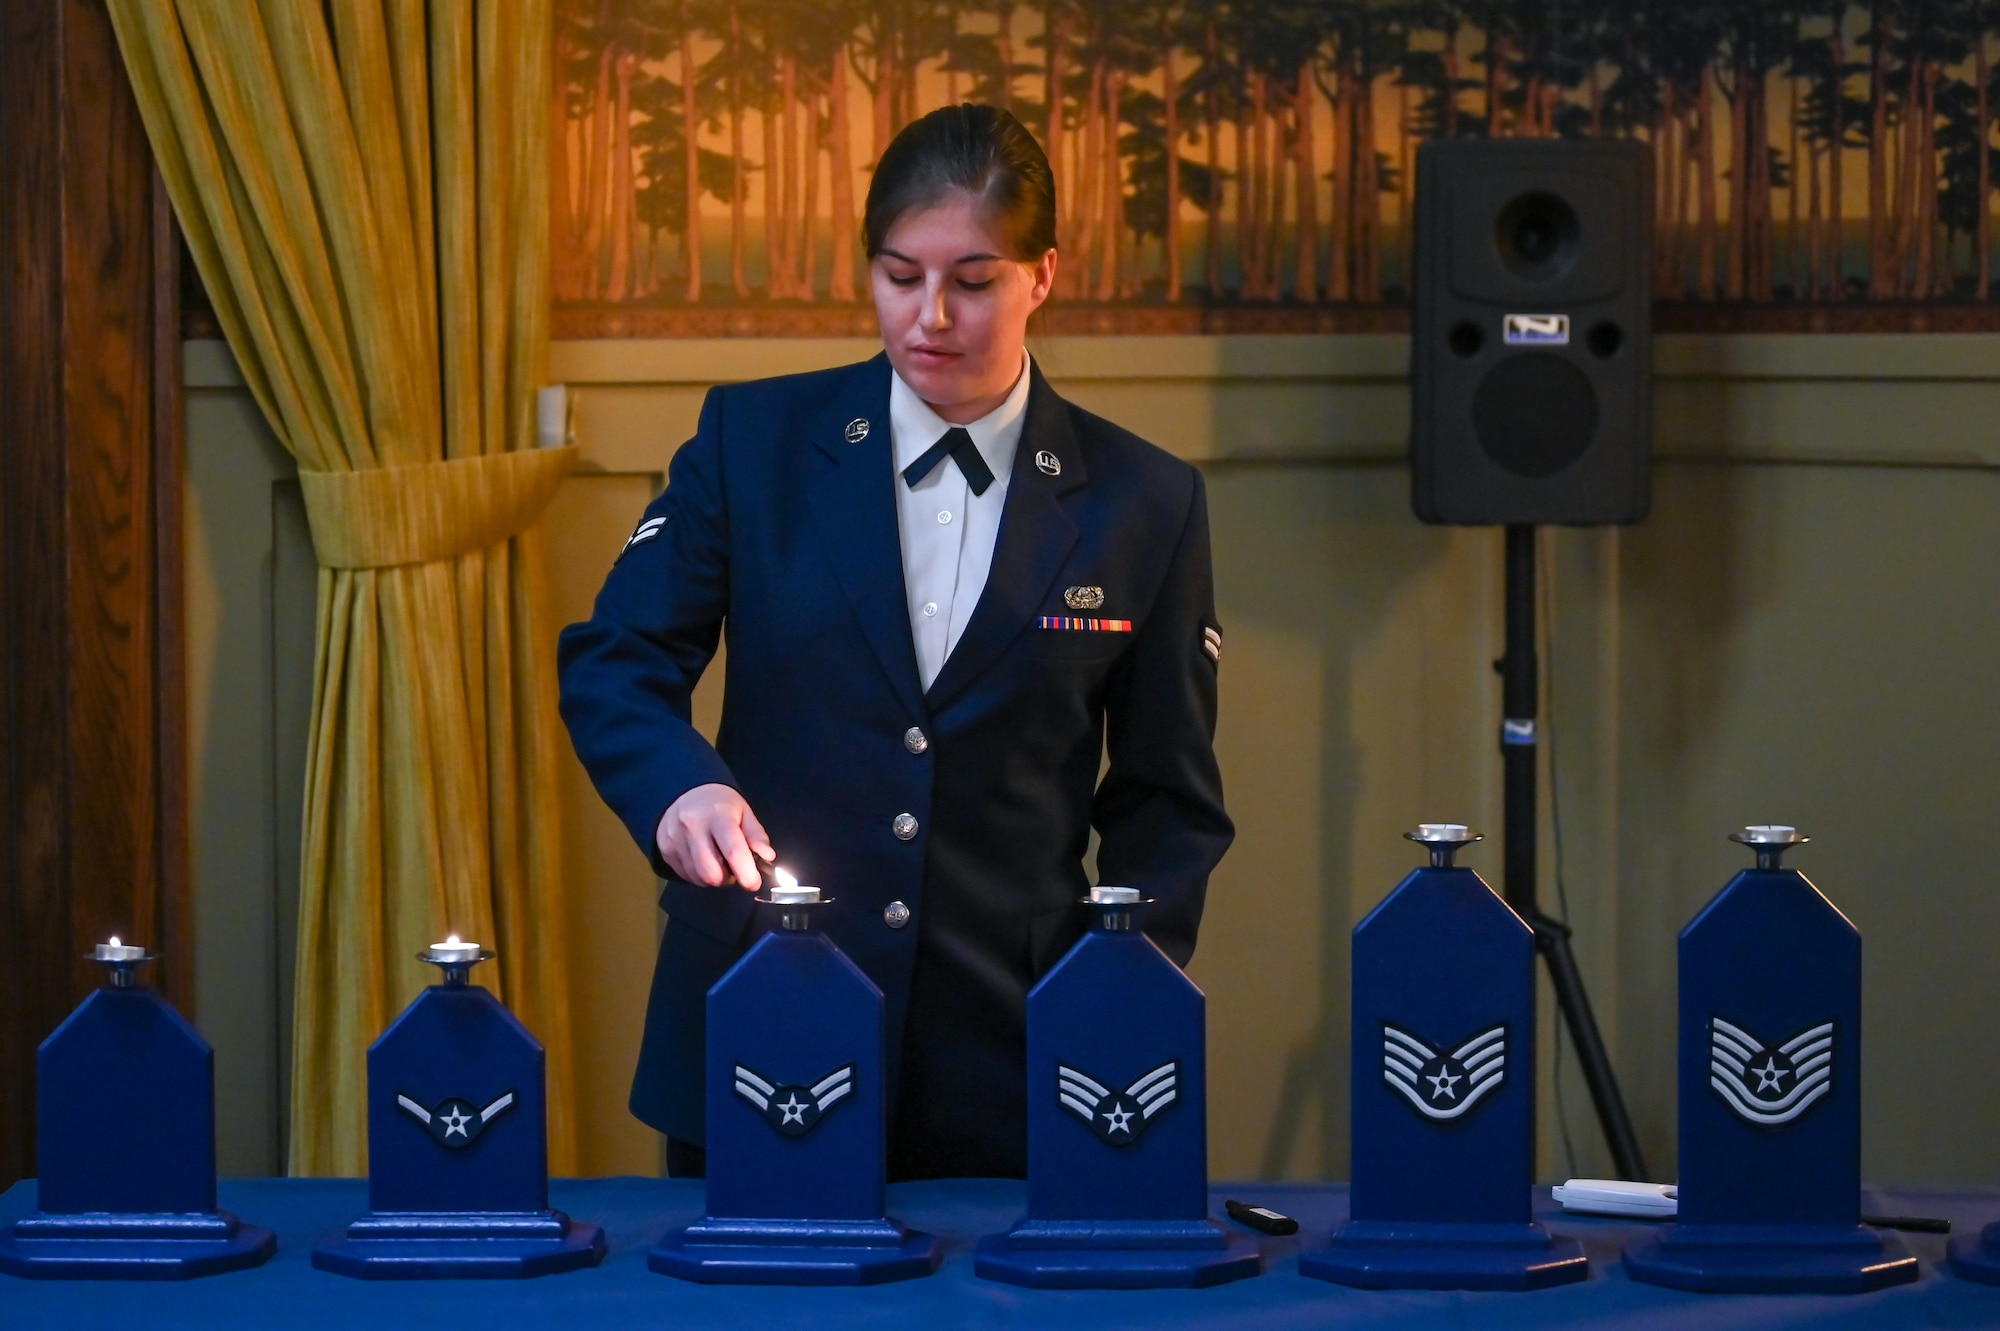 Airman 1st Class Kaeli Schiff, 75th Communications and Information Directorate, lights the candle representing the rank of airman 1st class